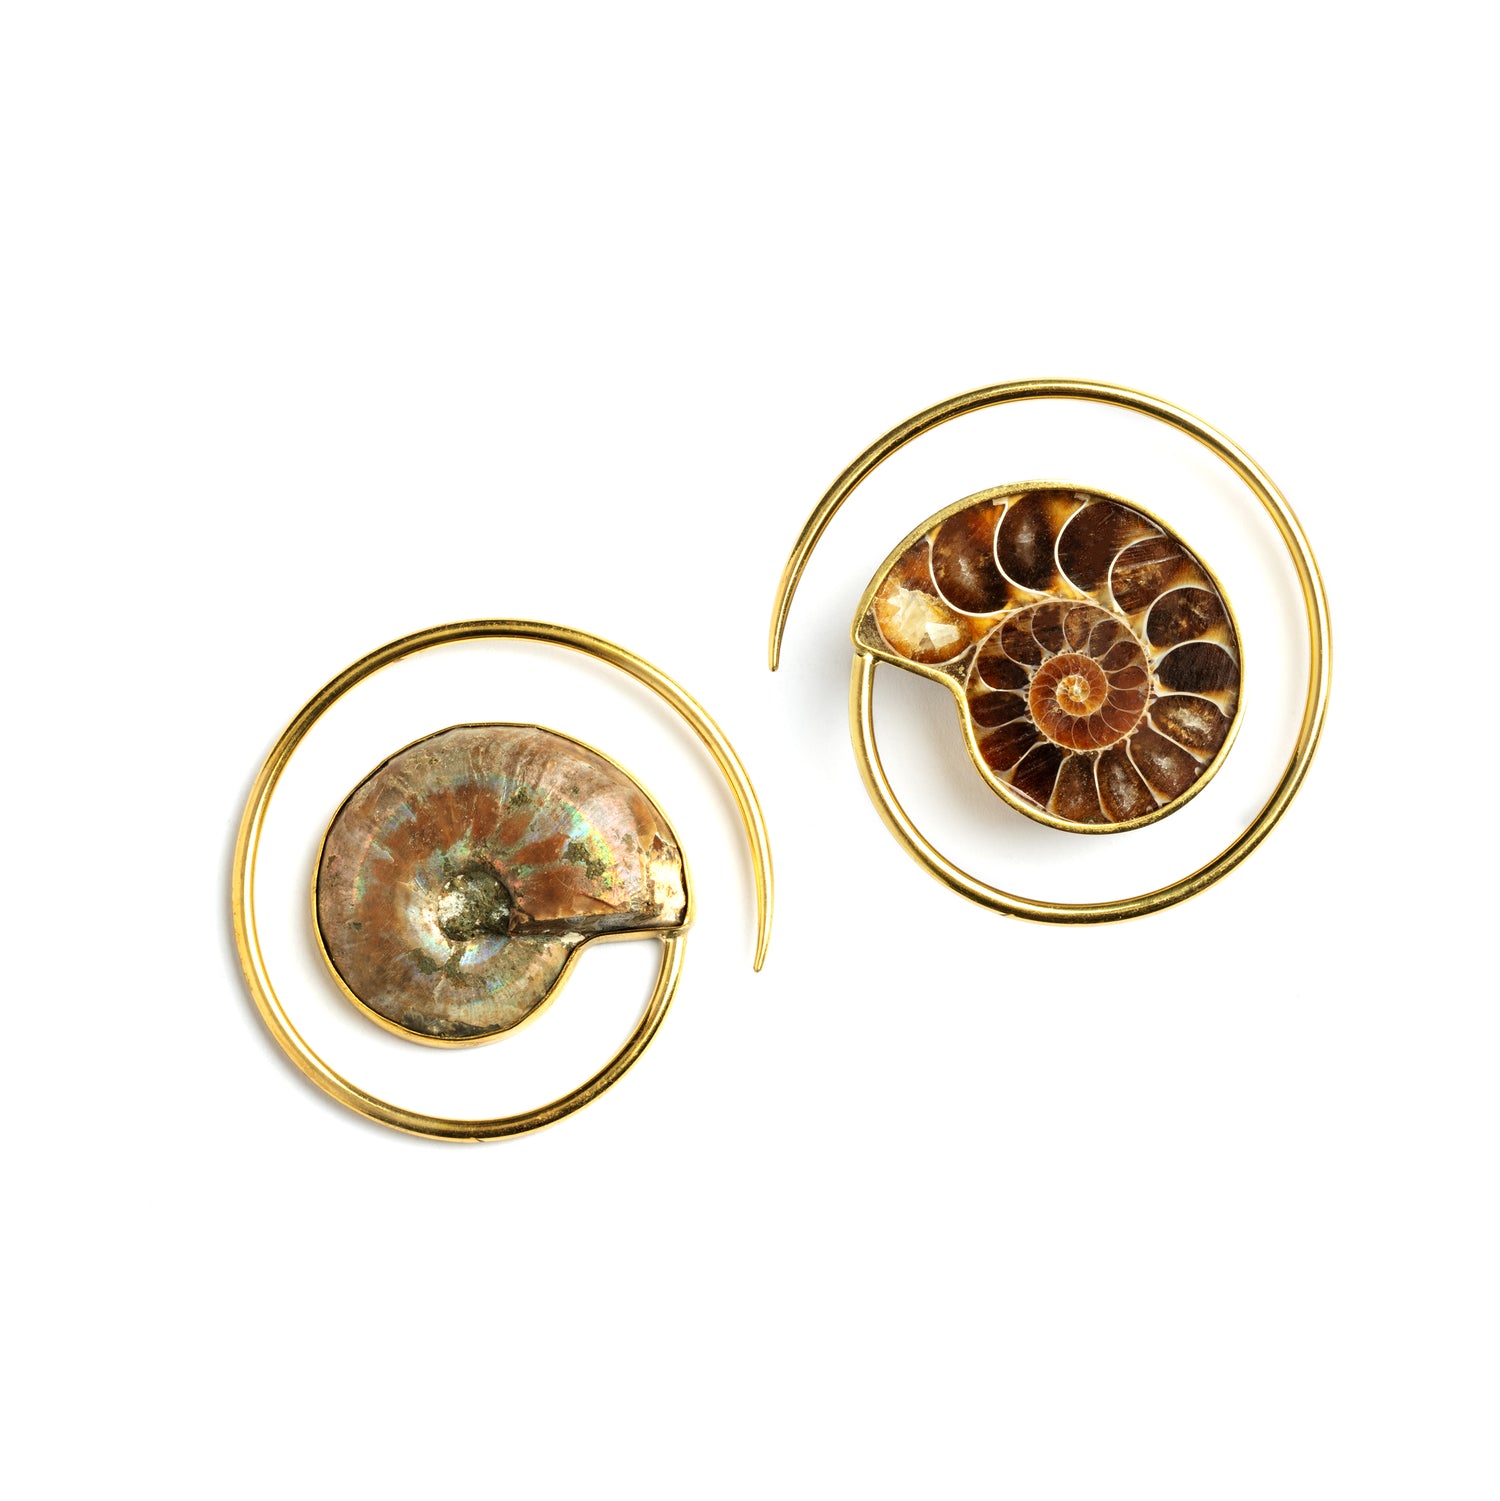 pair of golden spirals ear weights hangers with Ammonite fossil front and back view